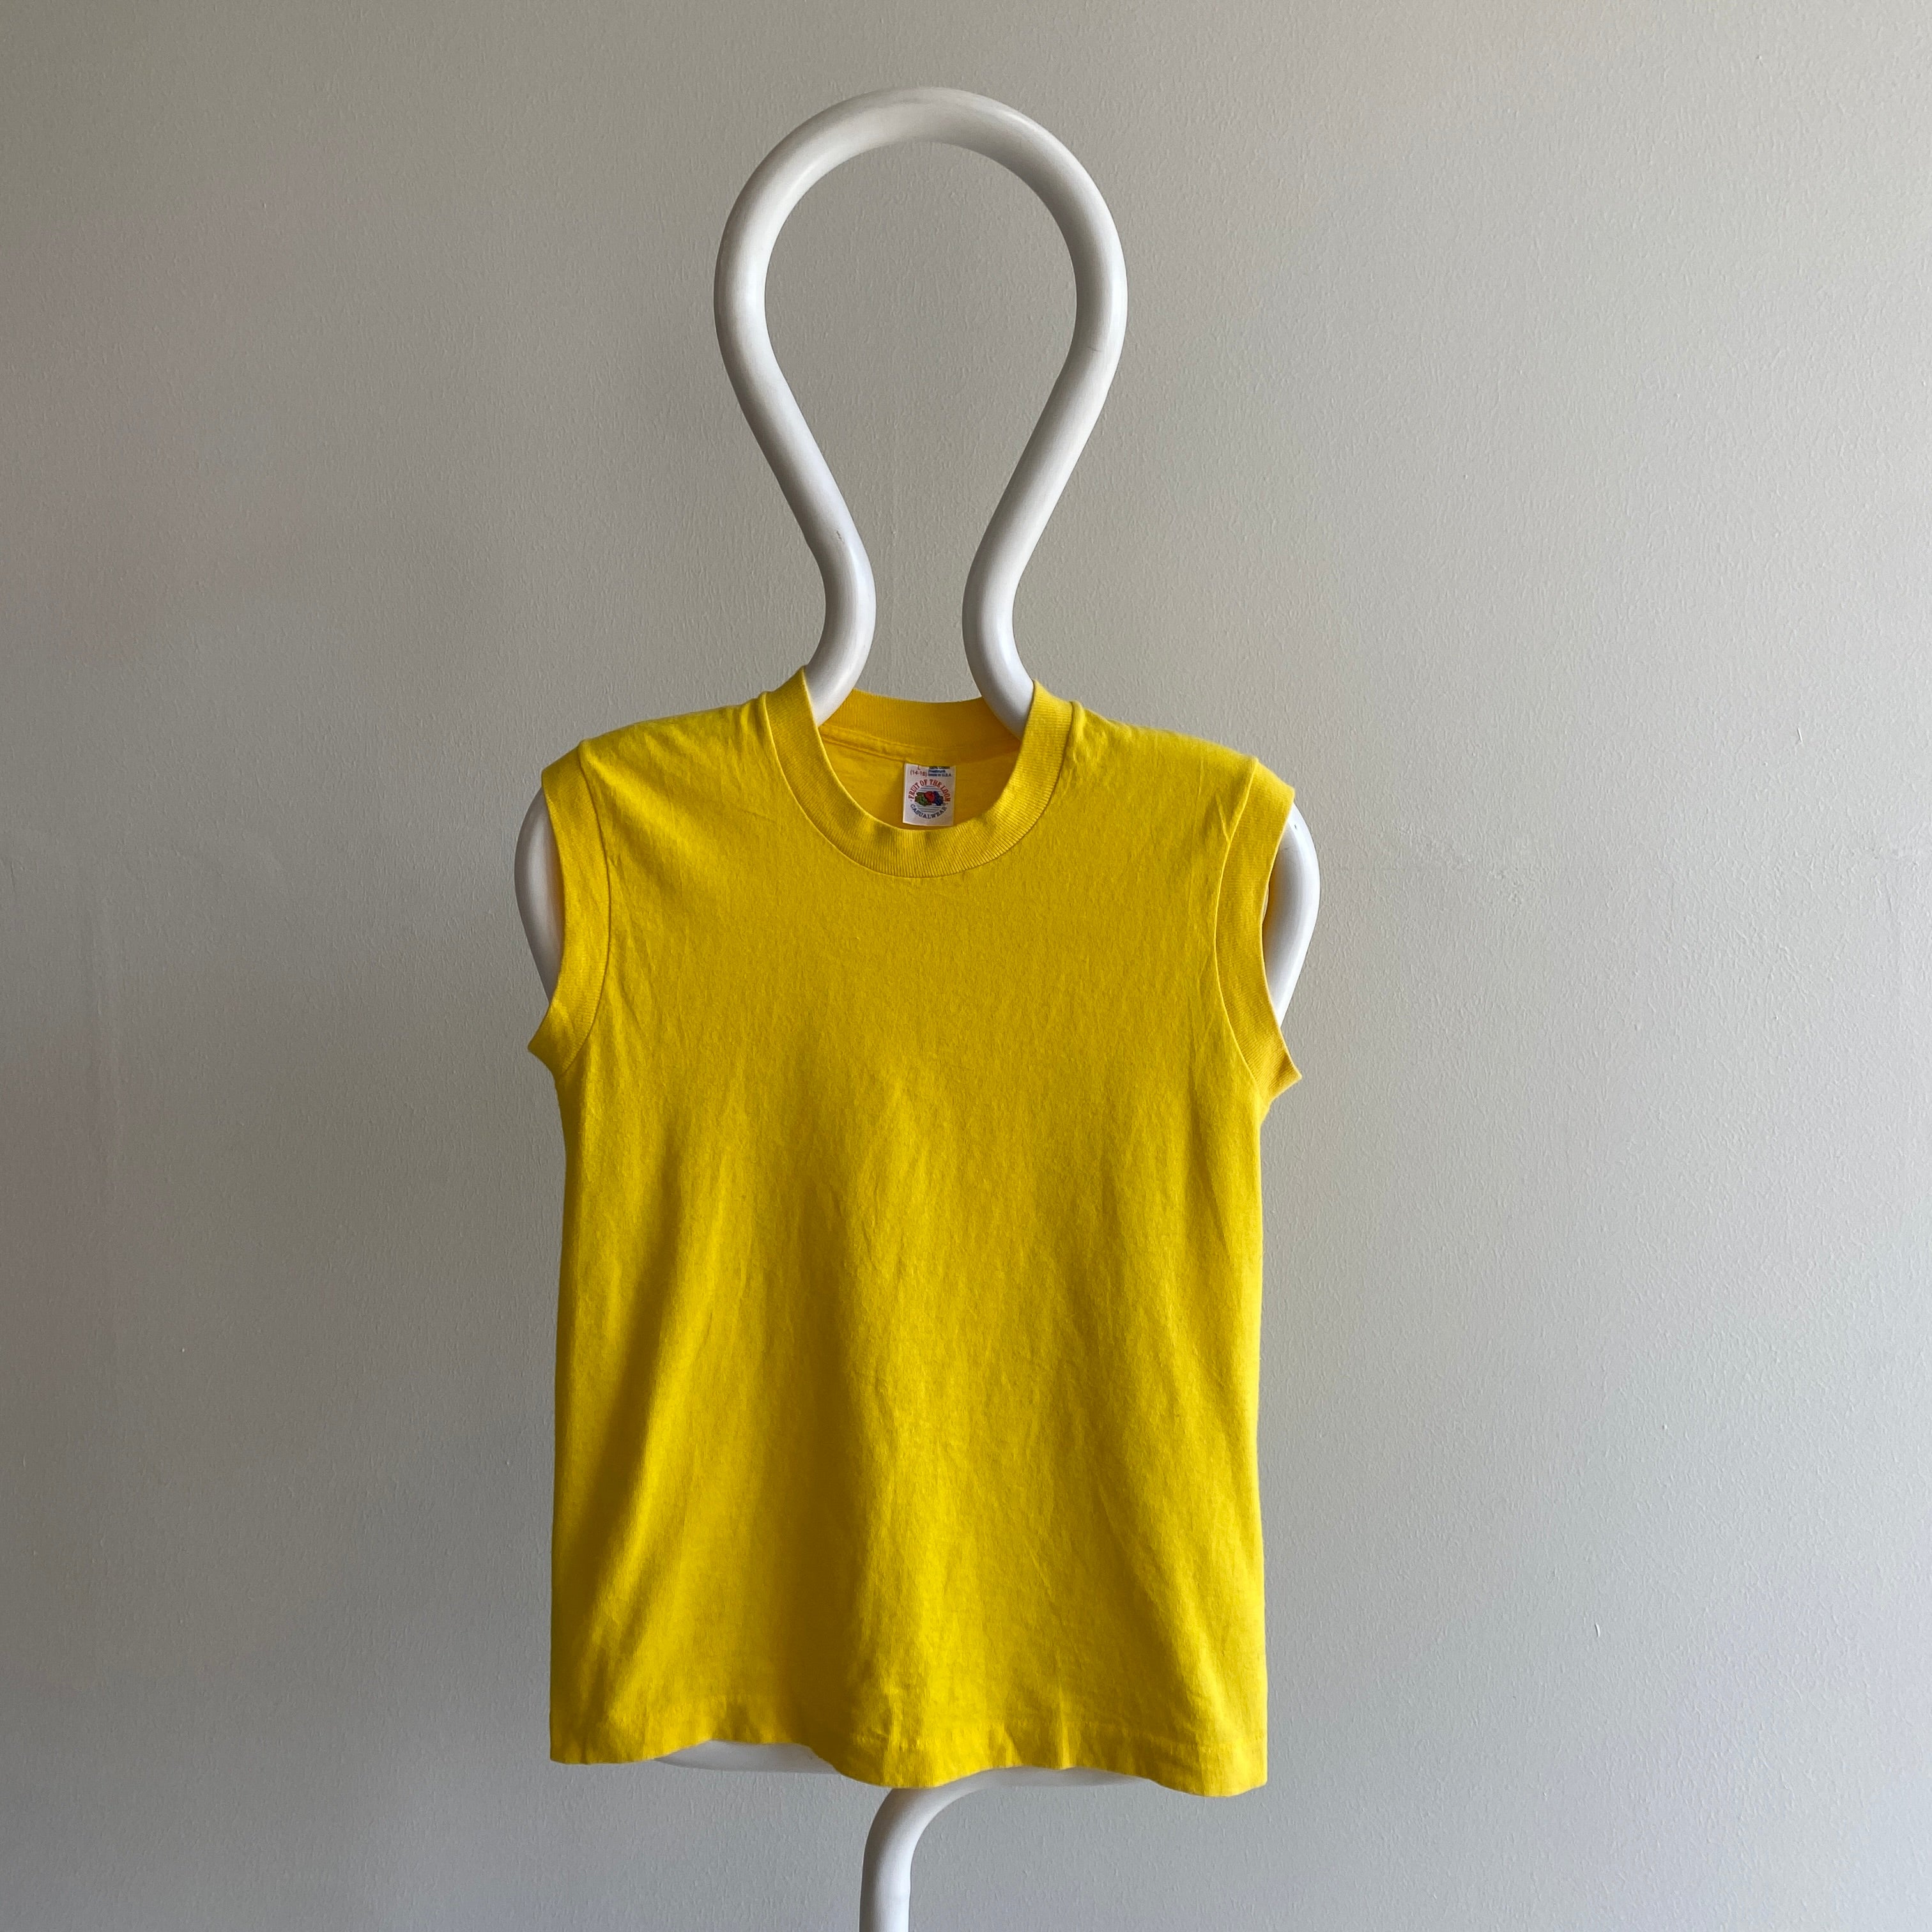 1980s Vibrant Yellow Smaller Muscle Tank by FOTL